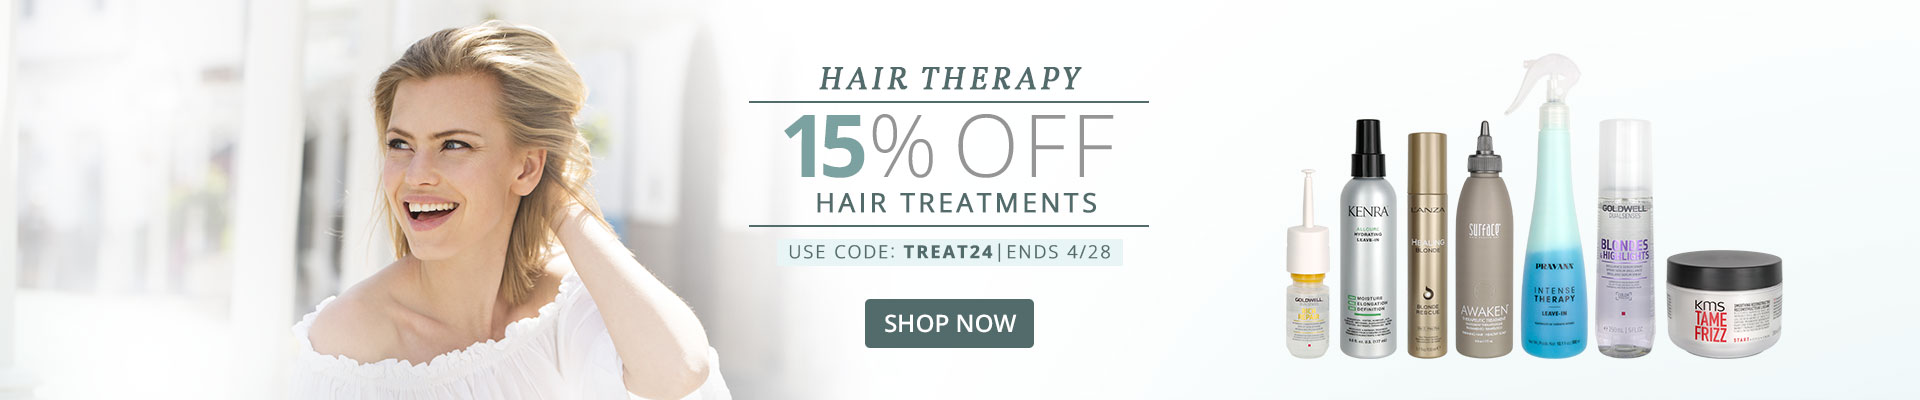 15% Off Hair Treatments | Use Code: TREAT24 - Ends 4/28